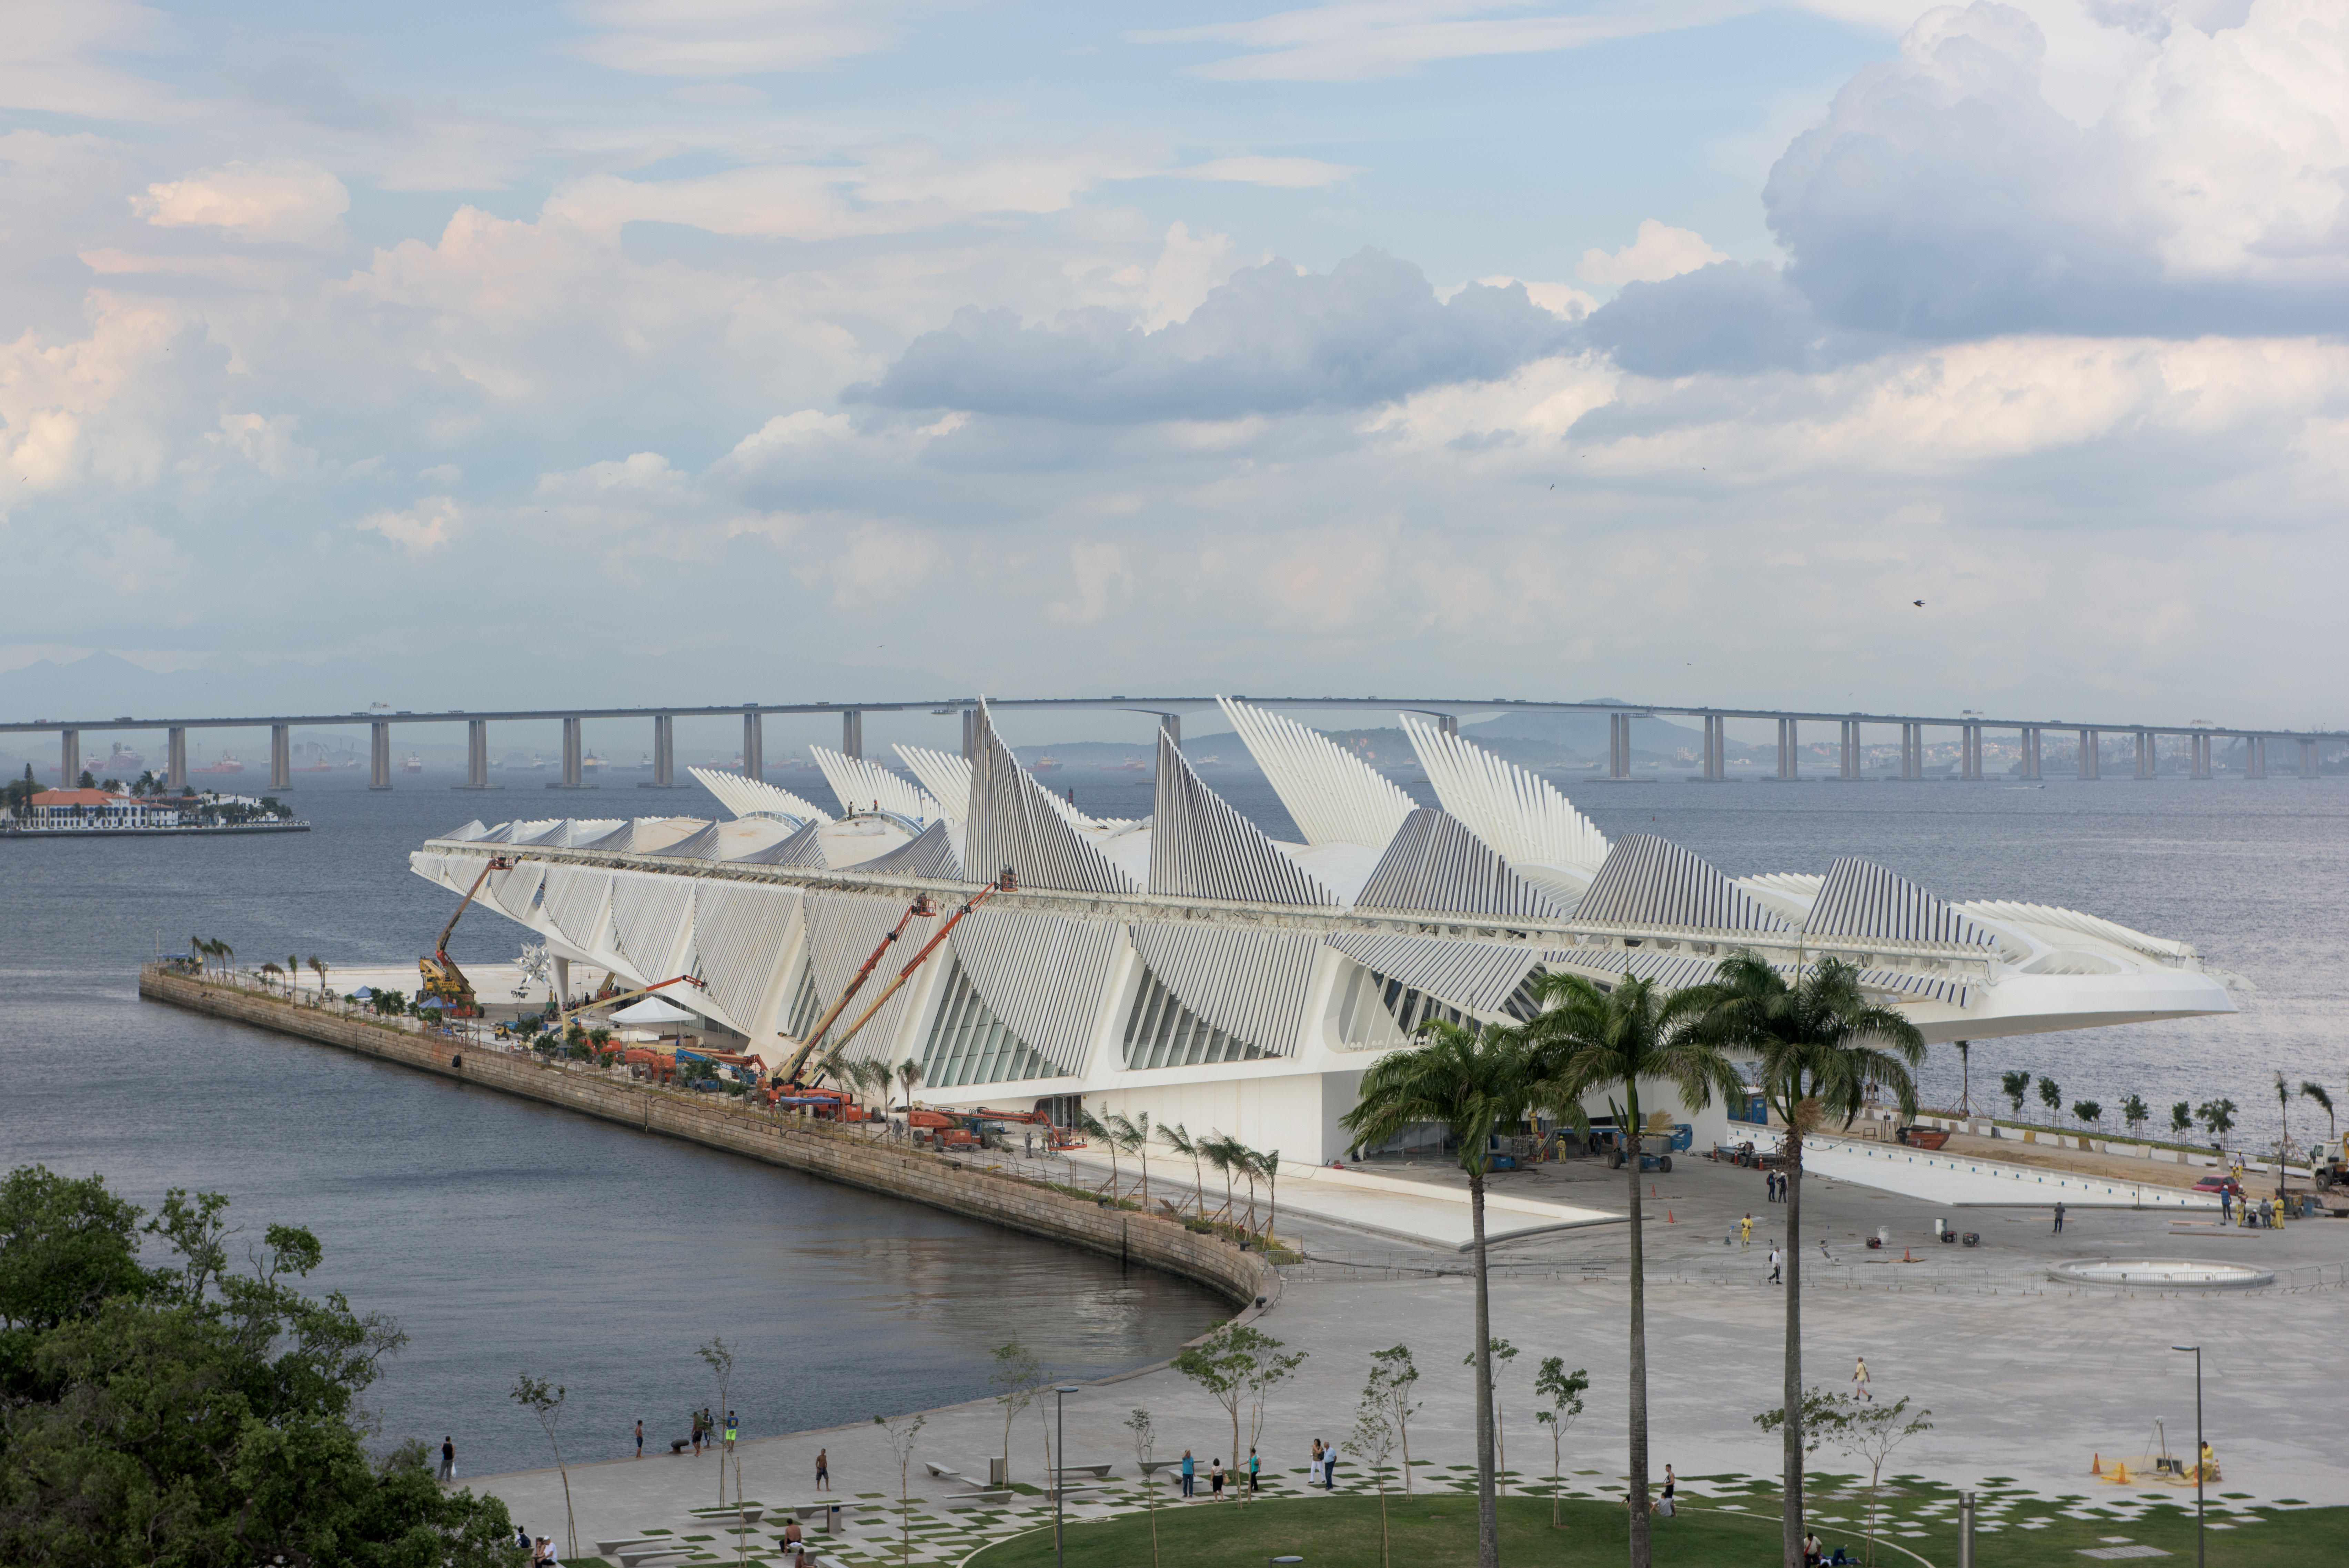 The Climate Hub is located within the Museum of Tomorrow in the port region of Rio de Janeiro. (Photo internet reproduction)